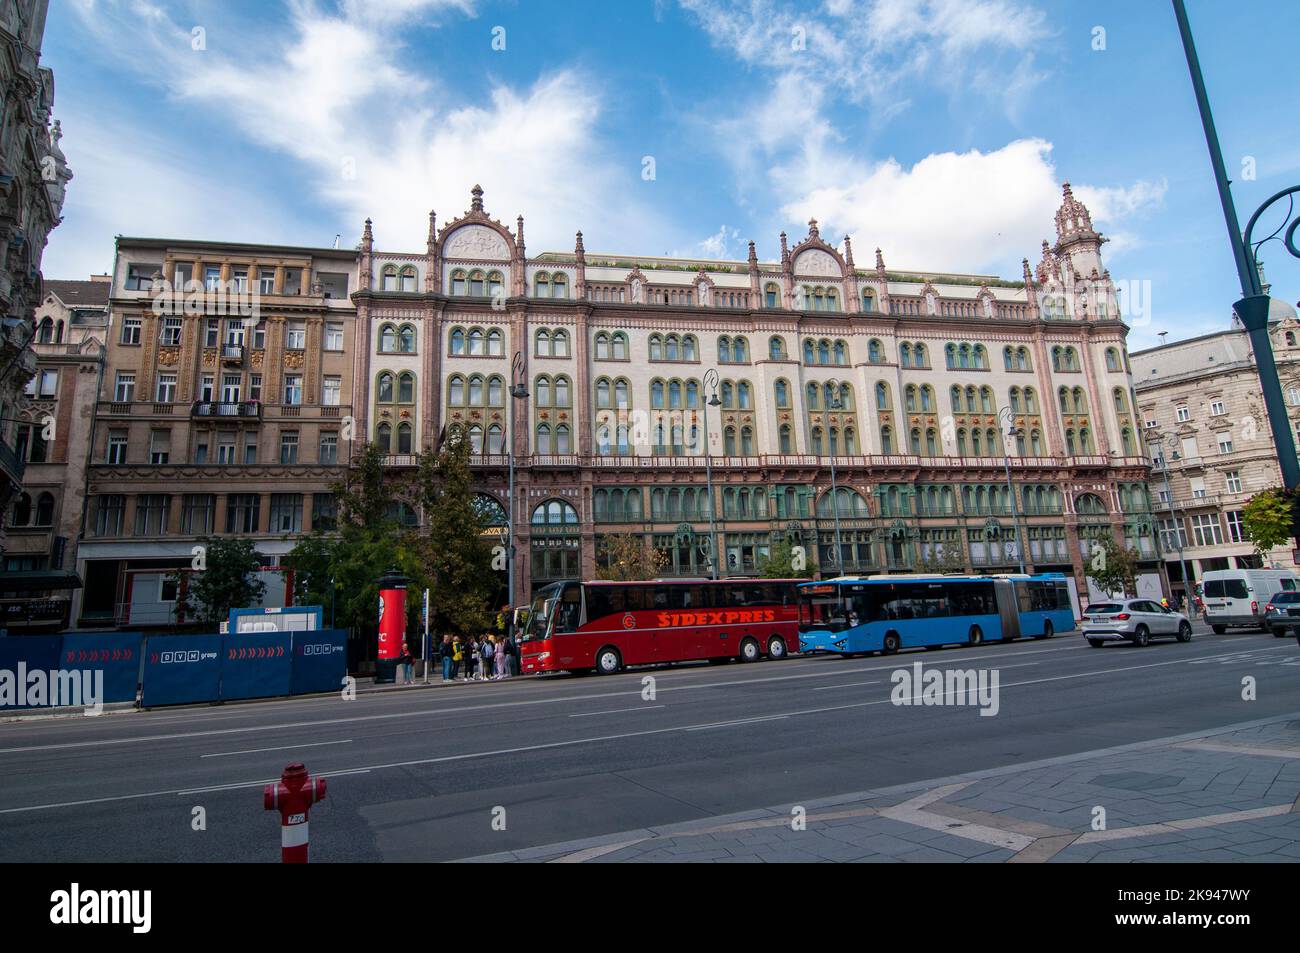 Exterior of a magnificent building at Ferenciek Tere (Ferenciek Square), District 5 Budapest, Hungary. Brudern House/Párizsi udvar: Built in 1909-1912 Stock Photo